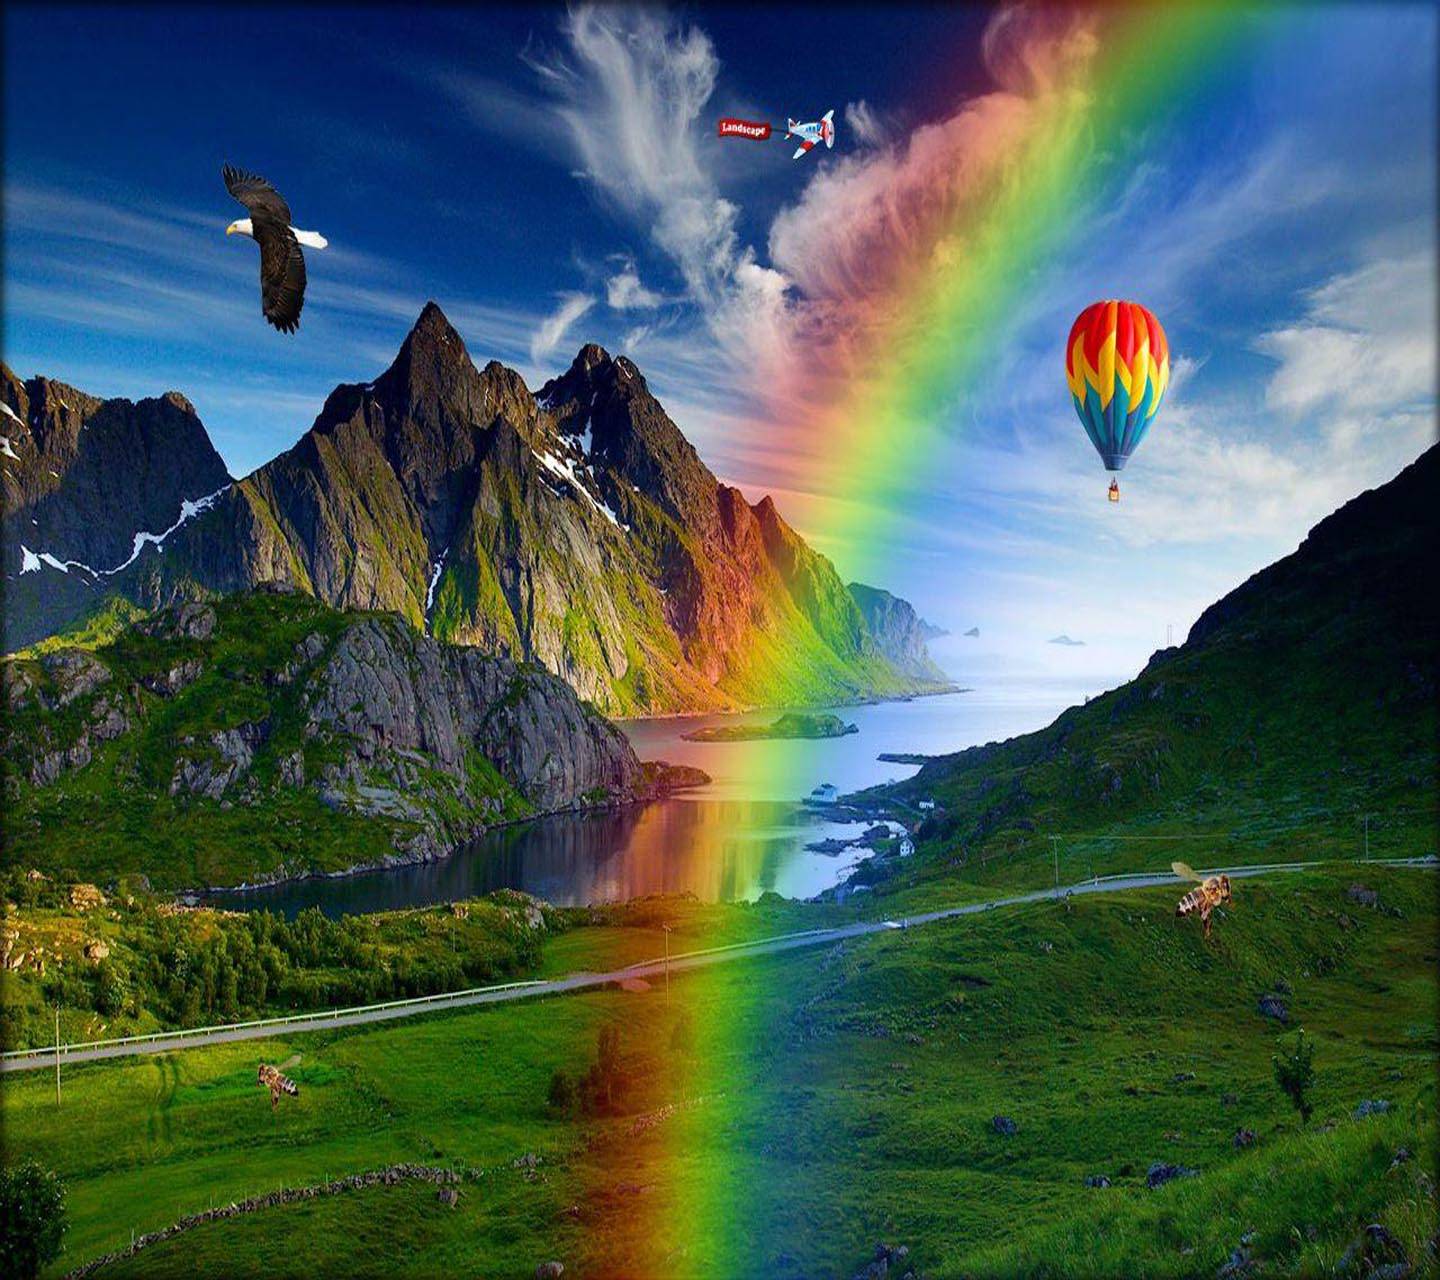 Rainbow Nature Wallpapers - Top Free Rainbow Nature Backgrounds ...